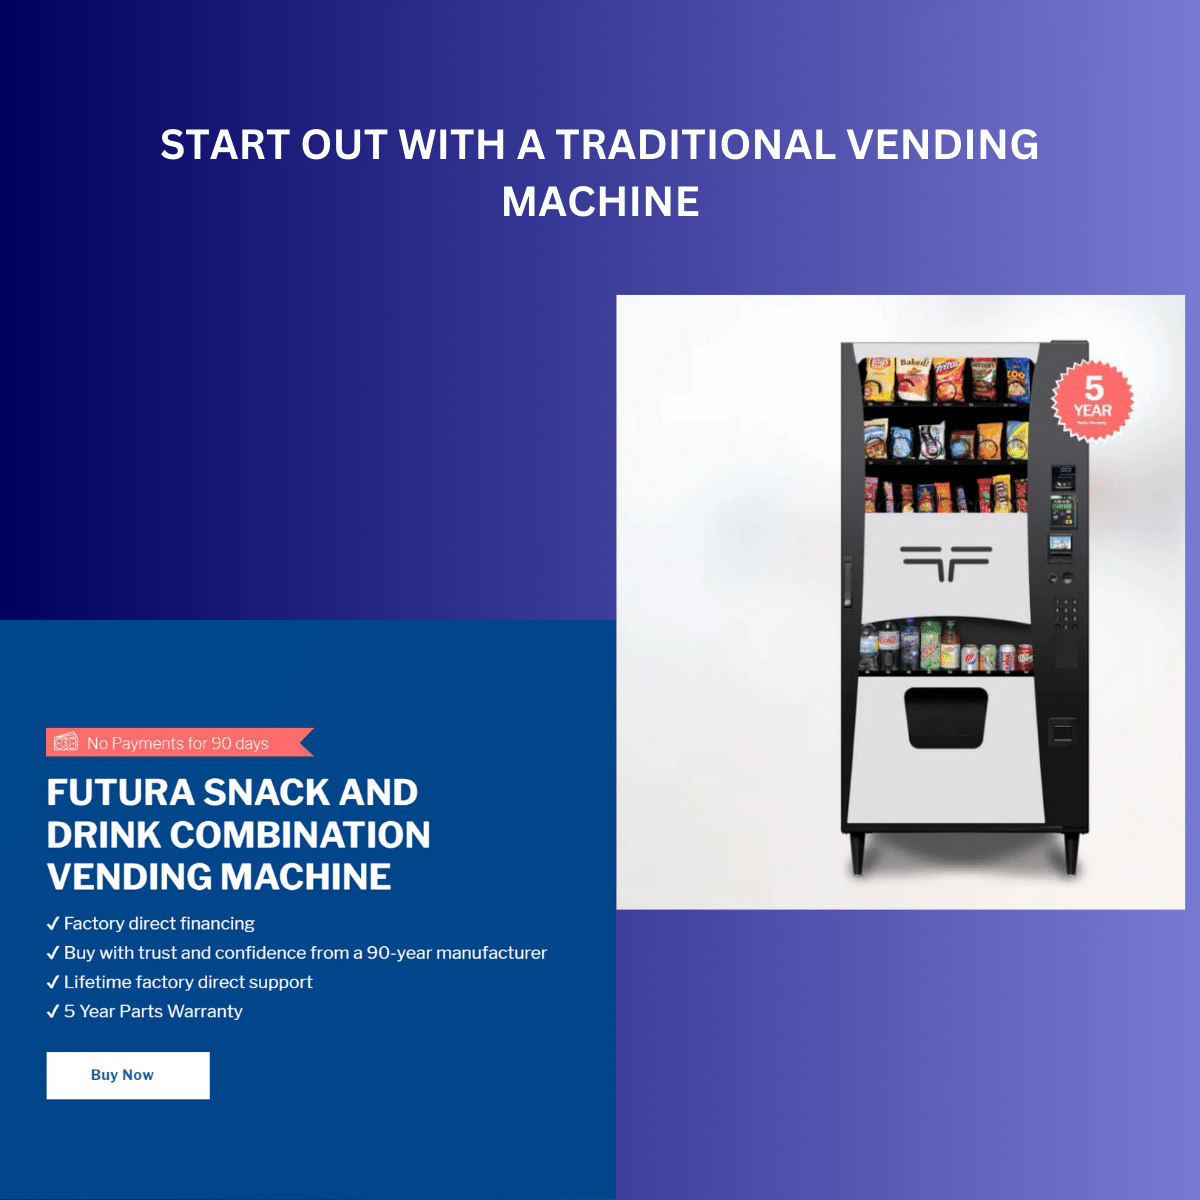 START OUT WITH A TRADITIONAL VENDING MACHINE